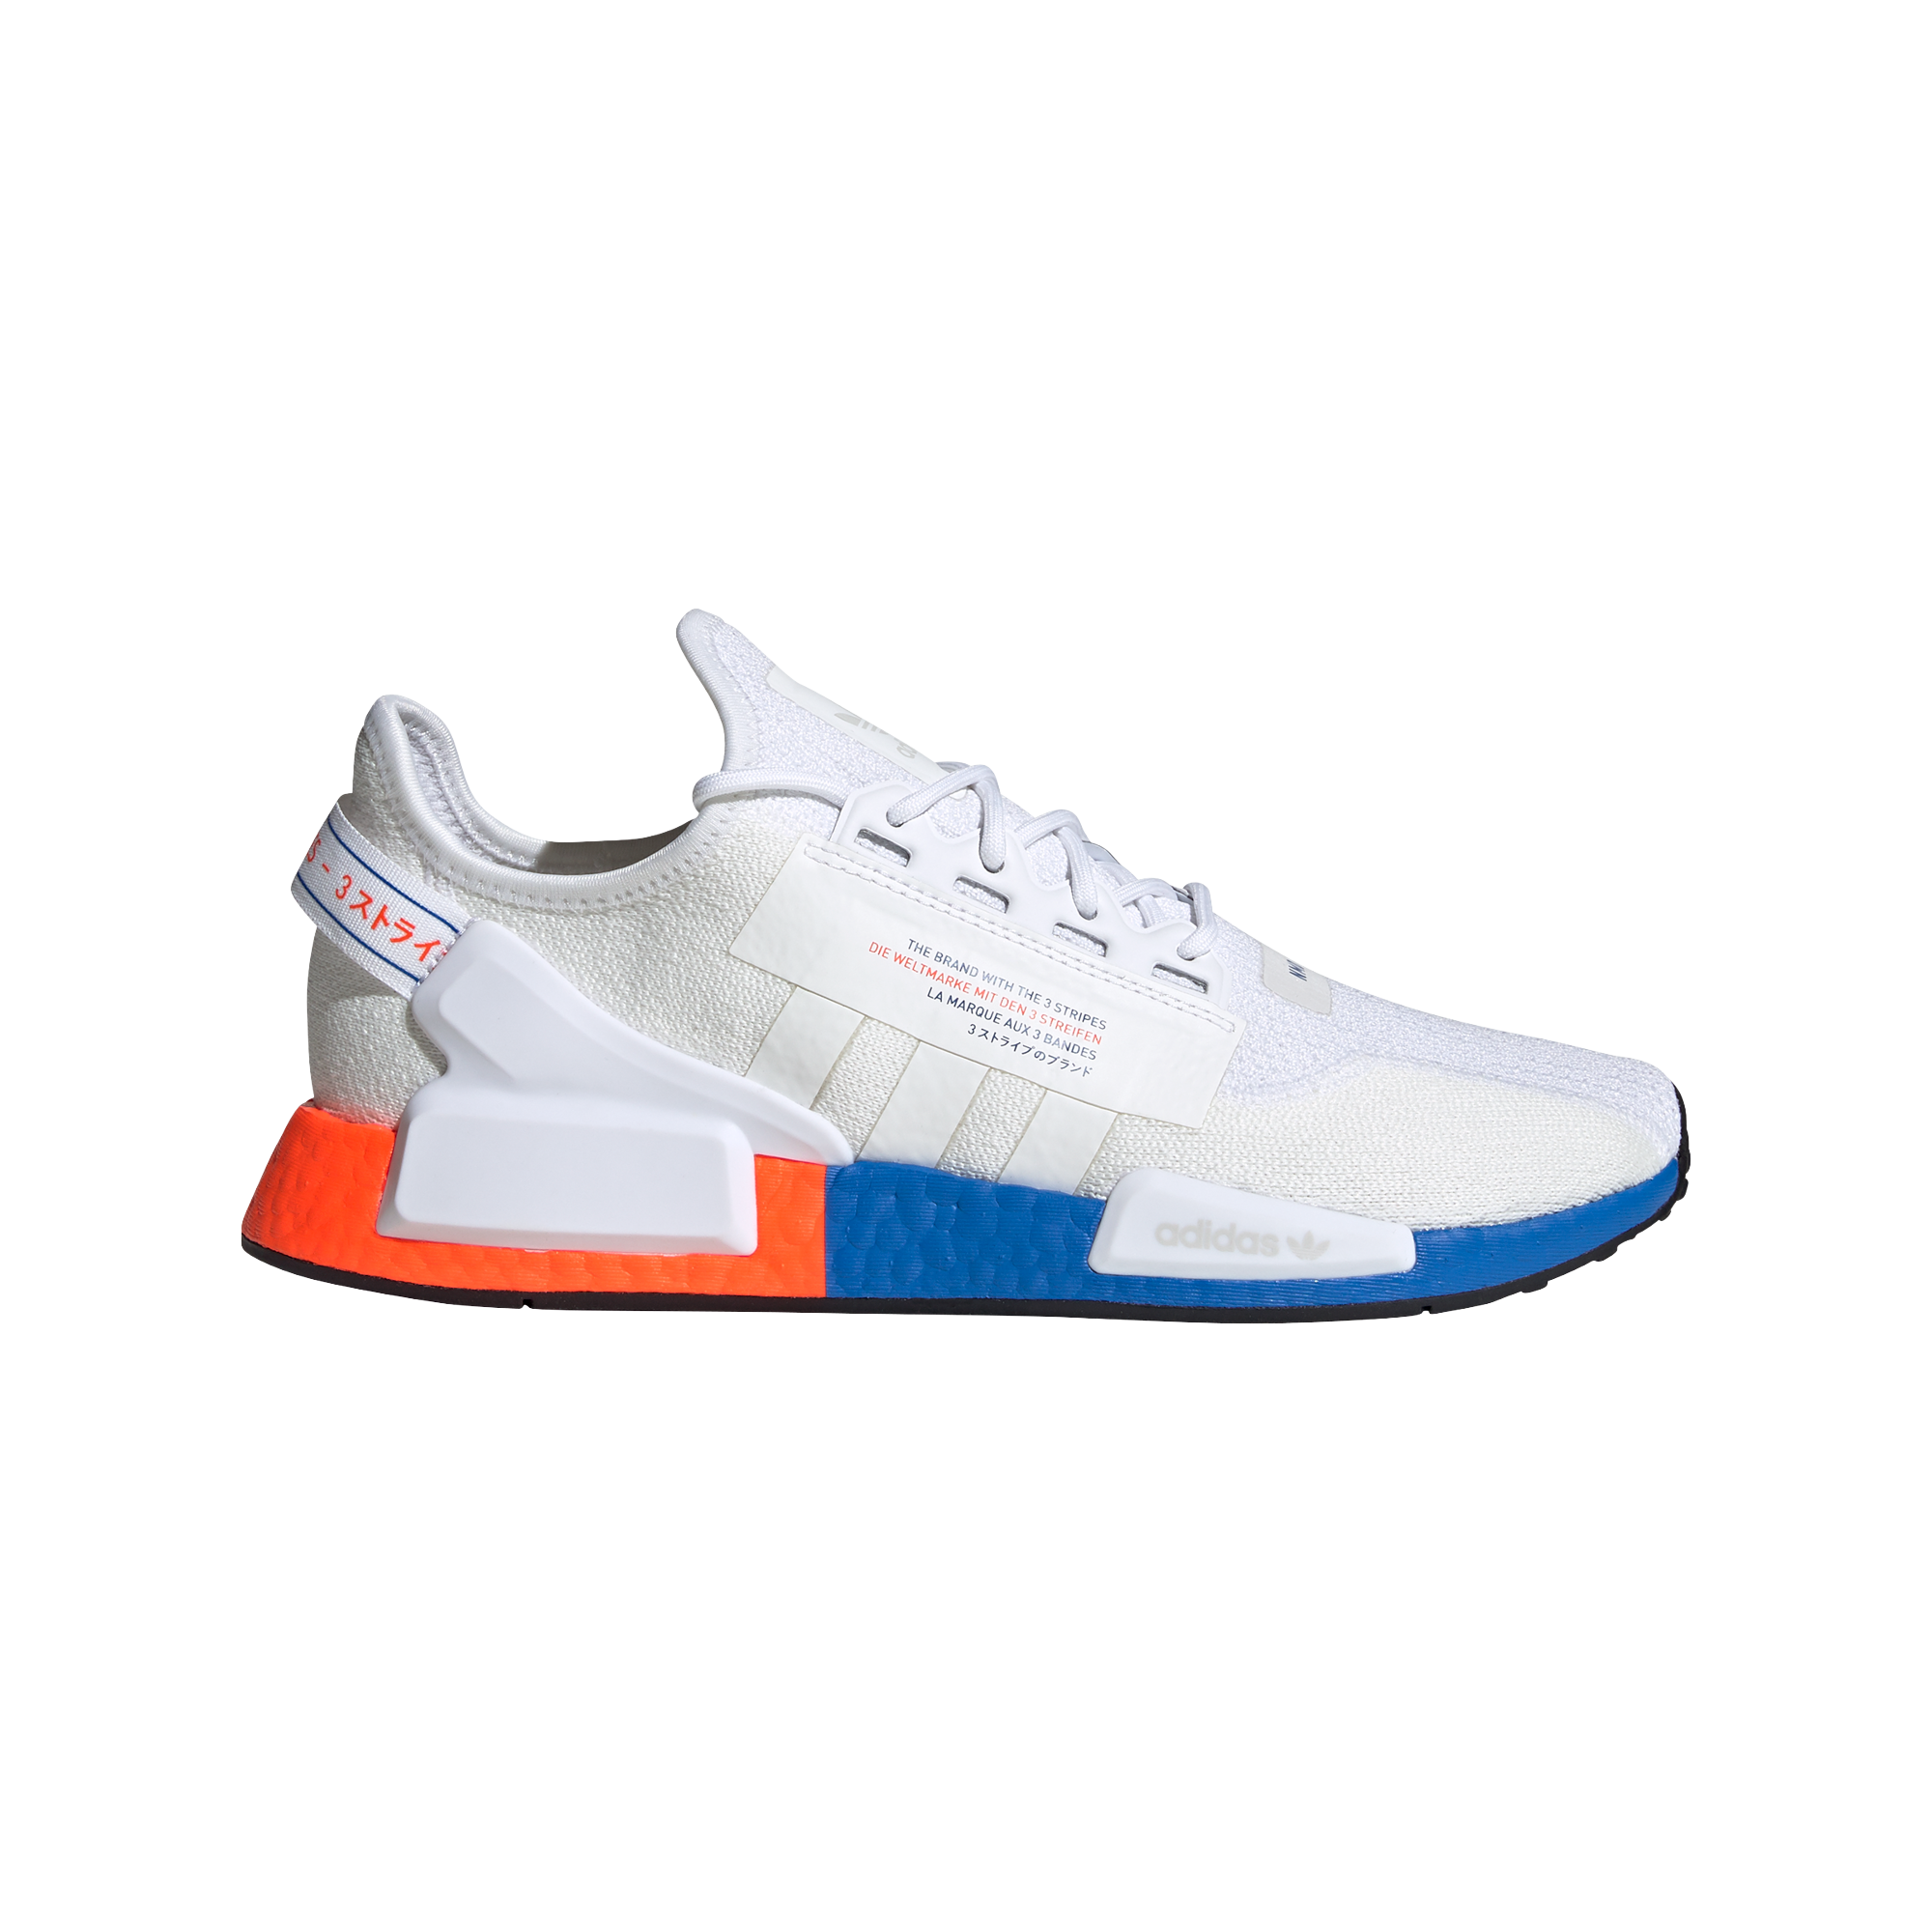 but s originals nmd r1 shoes off 64% oslocouk